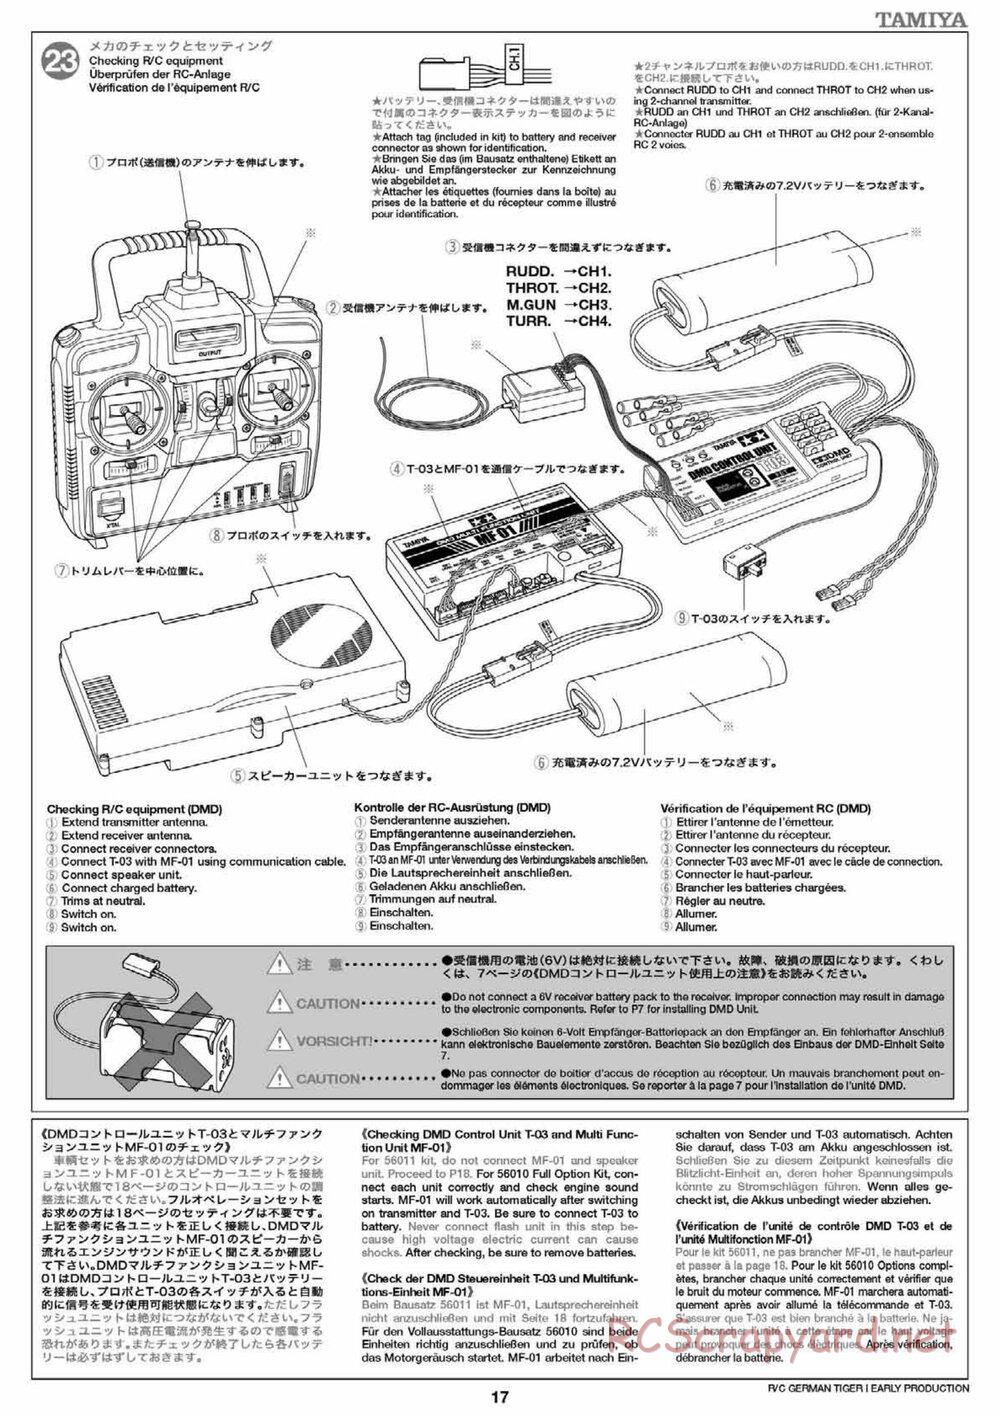 Tamiya - Tiger I Early Production - 1/16 Scale Chassis - Manual - Page 17